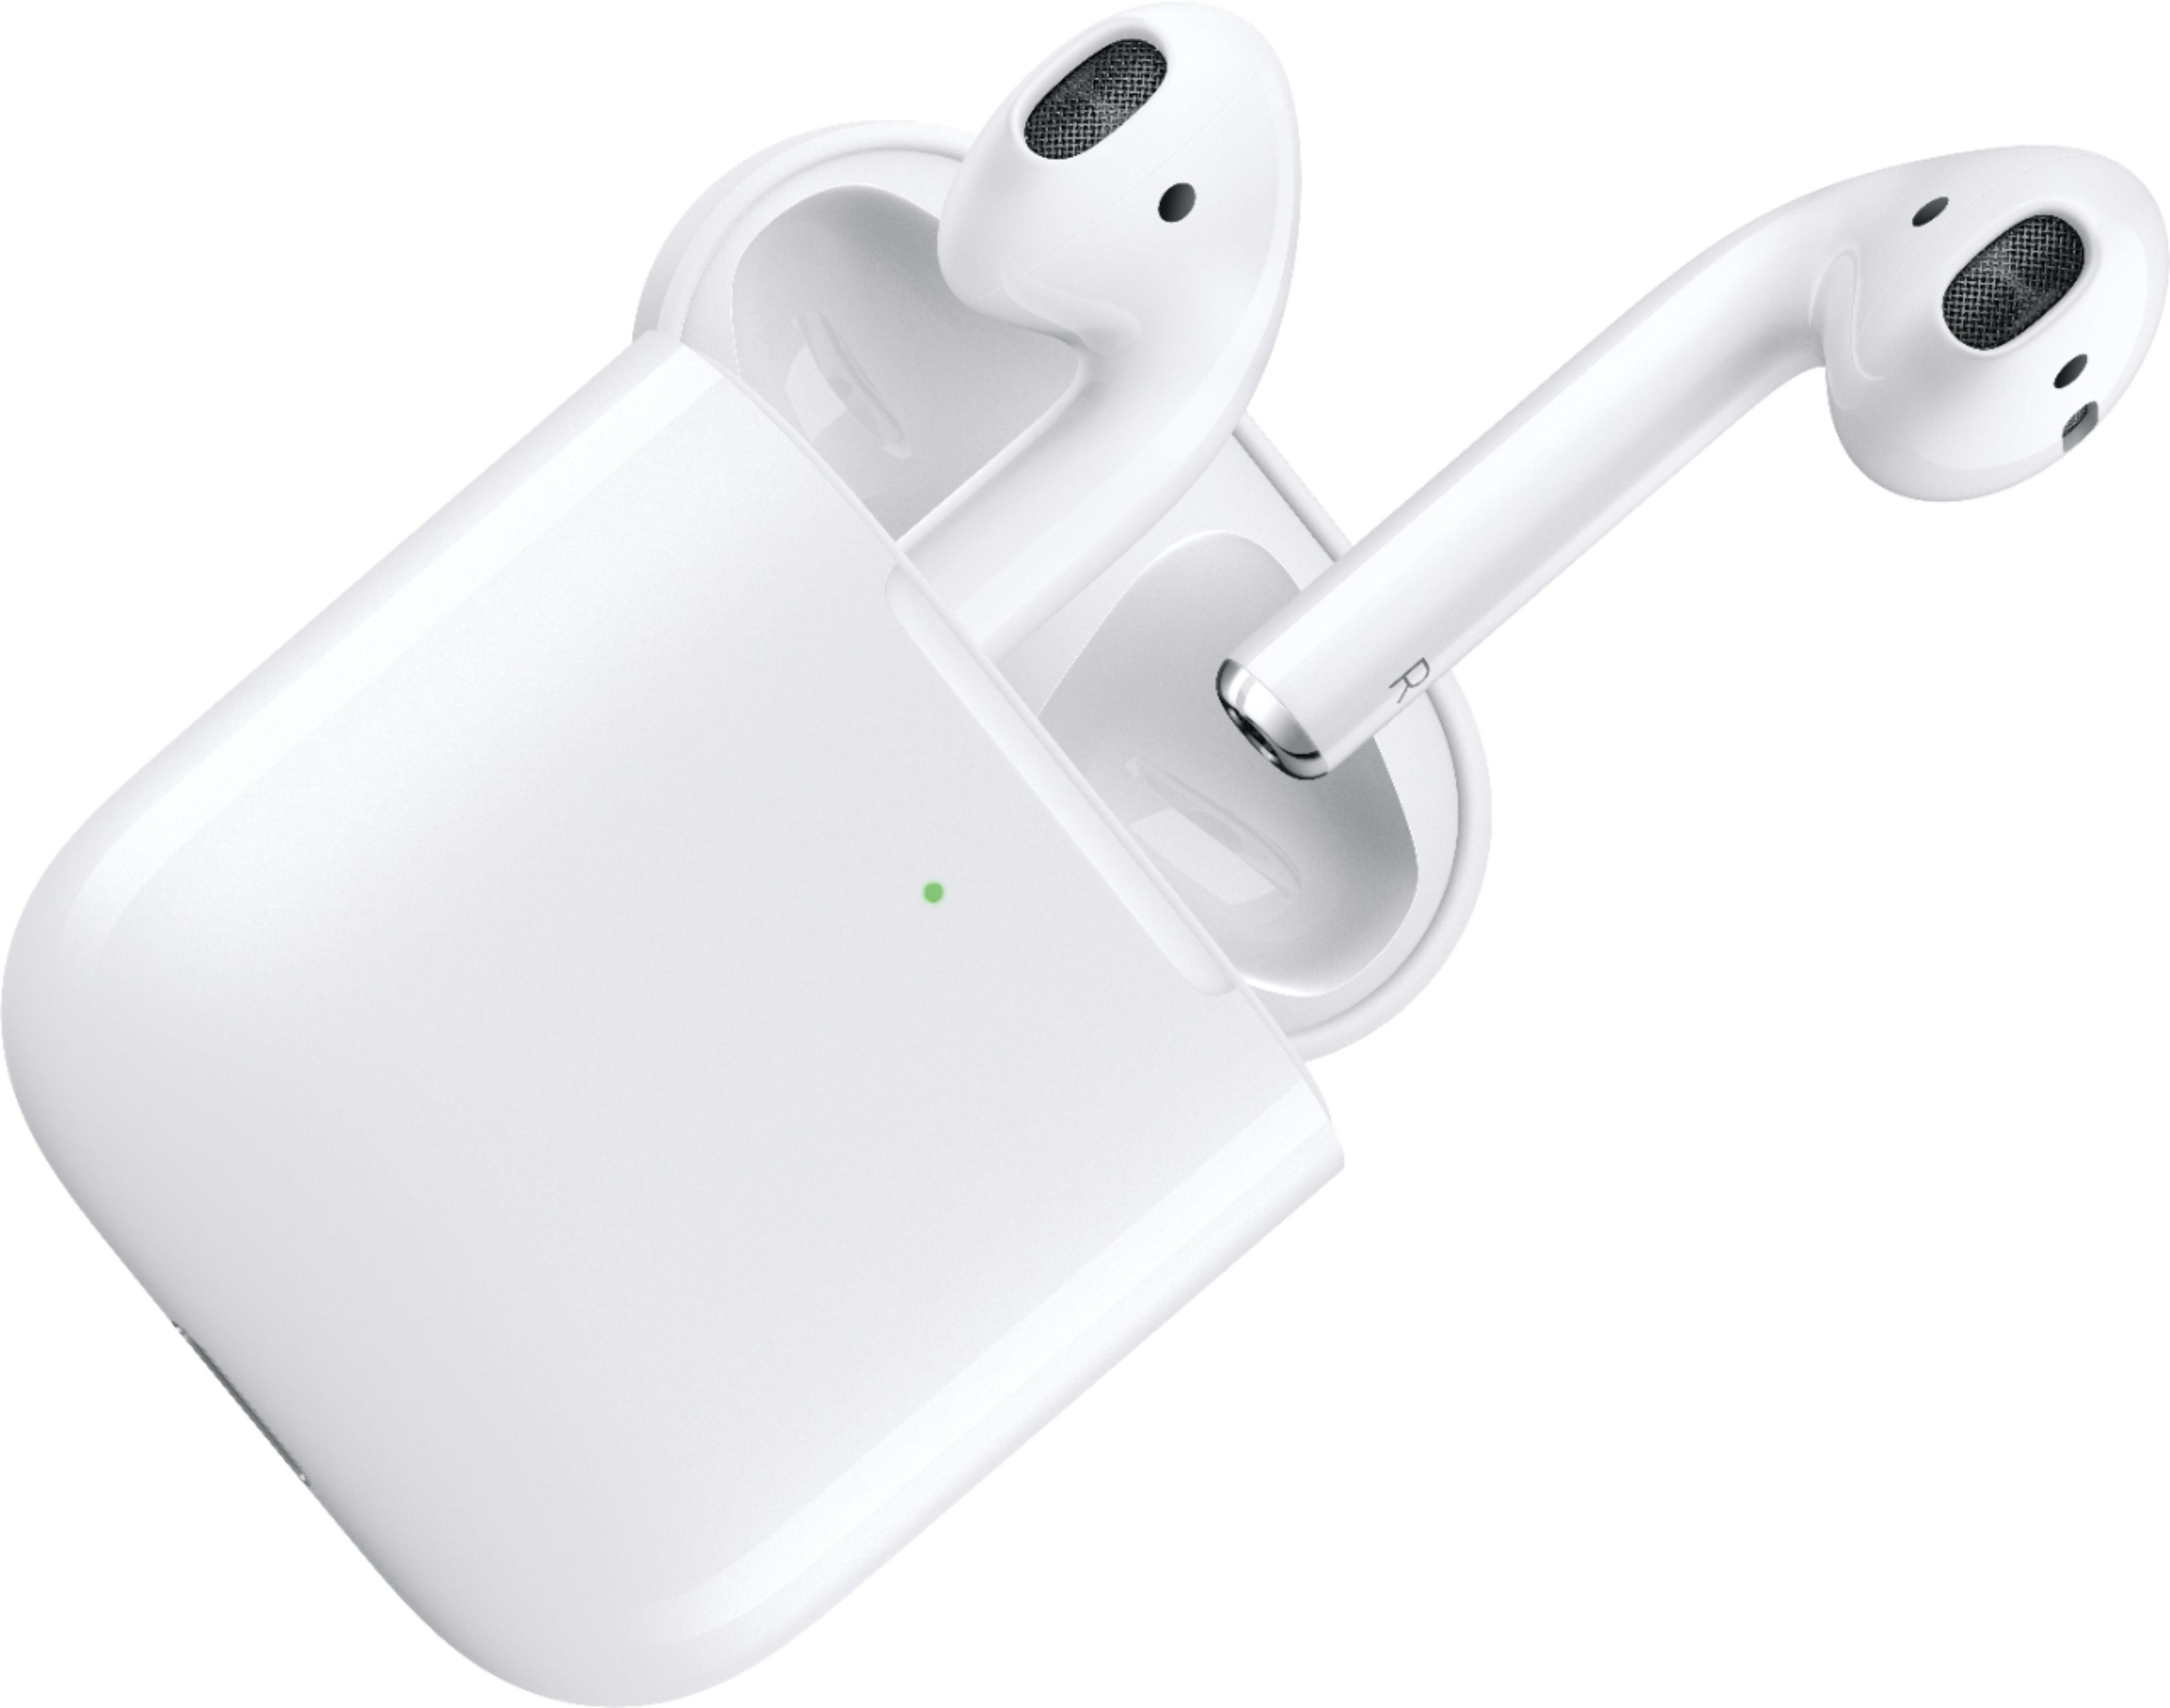 Apple AirPods with Charging Case (Latest Model) - $119.99 or With Wireless Charging Case $159.99 and AirPods Pro $199.99